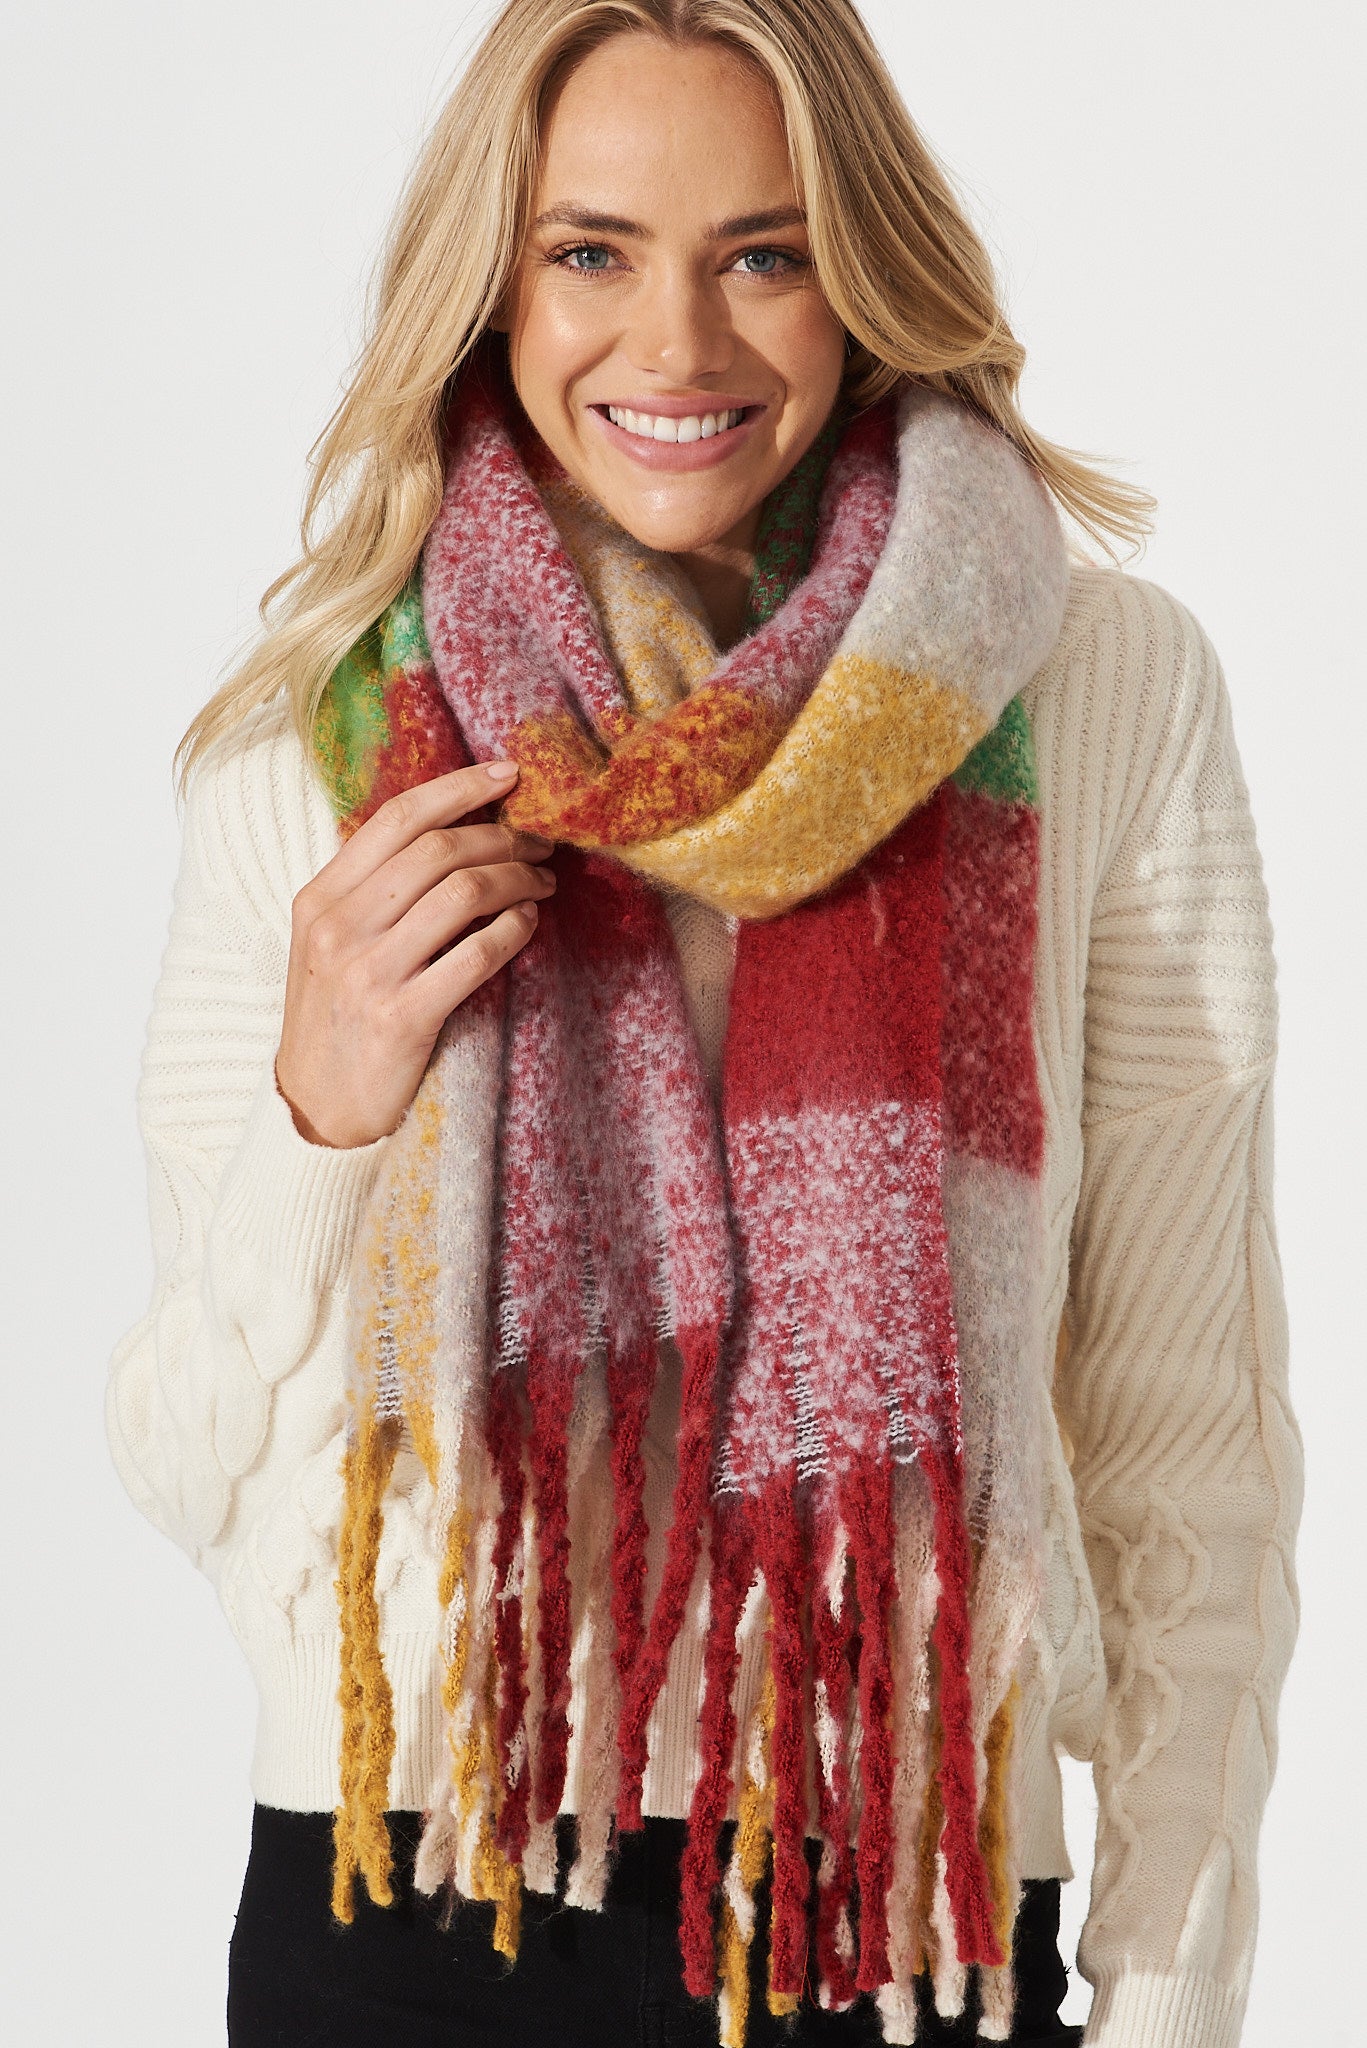 August + Delilah Brooklyn Oversized Knit Scarf In Red And Green Check - front